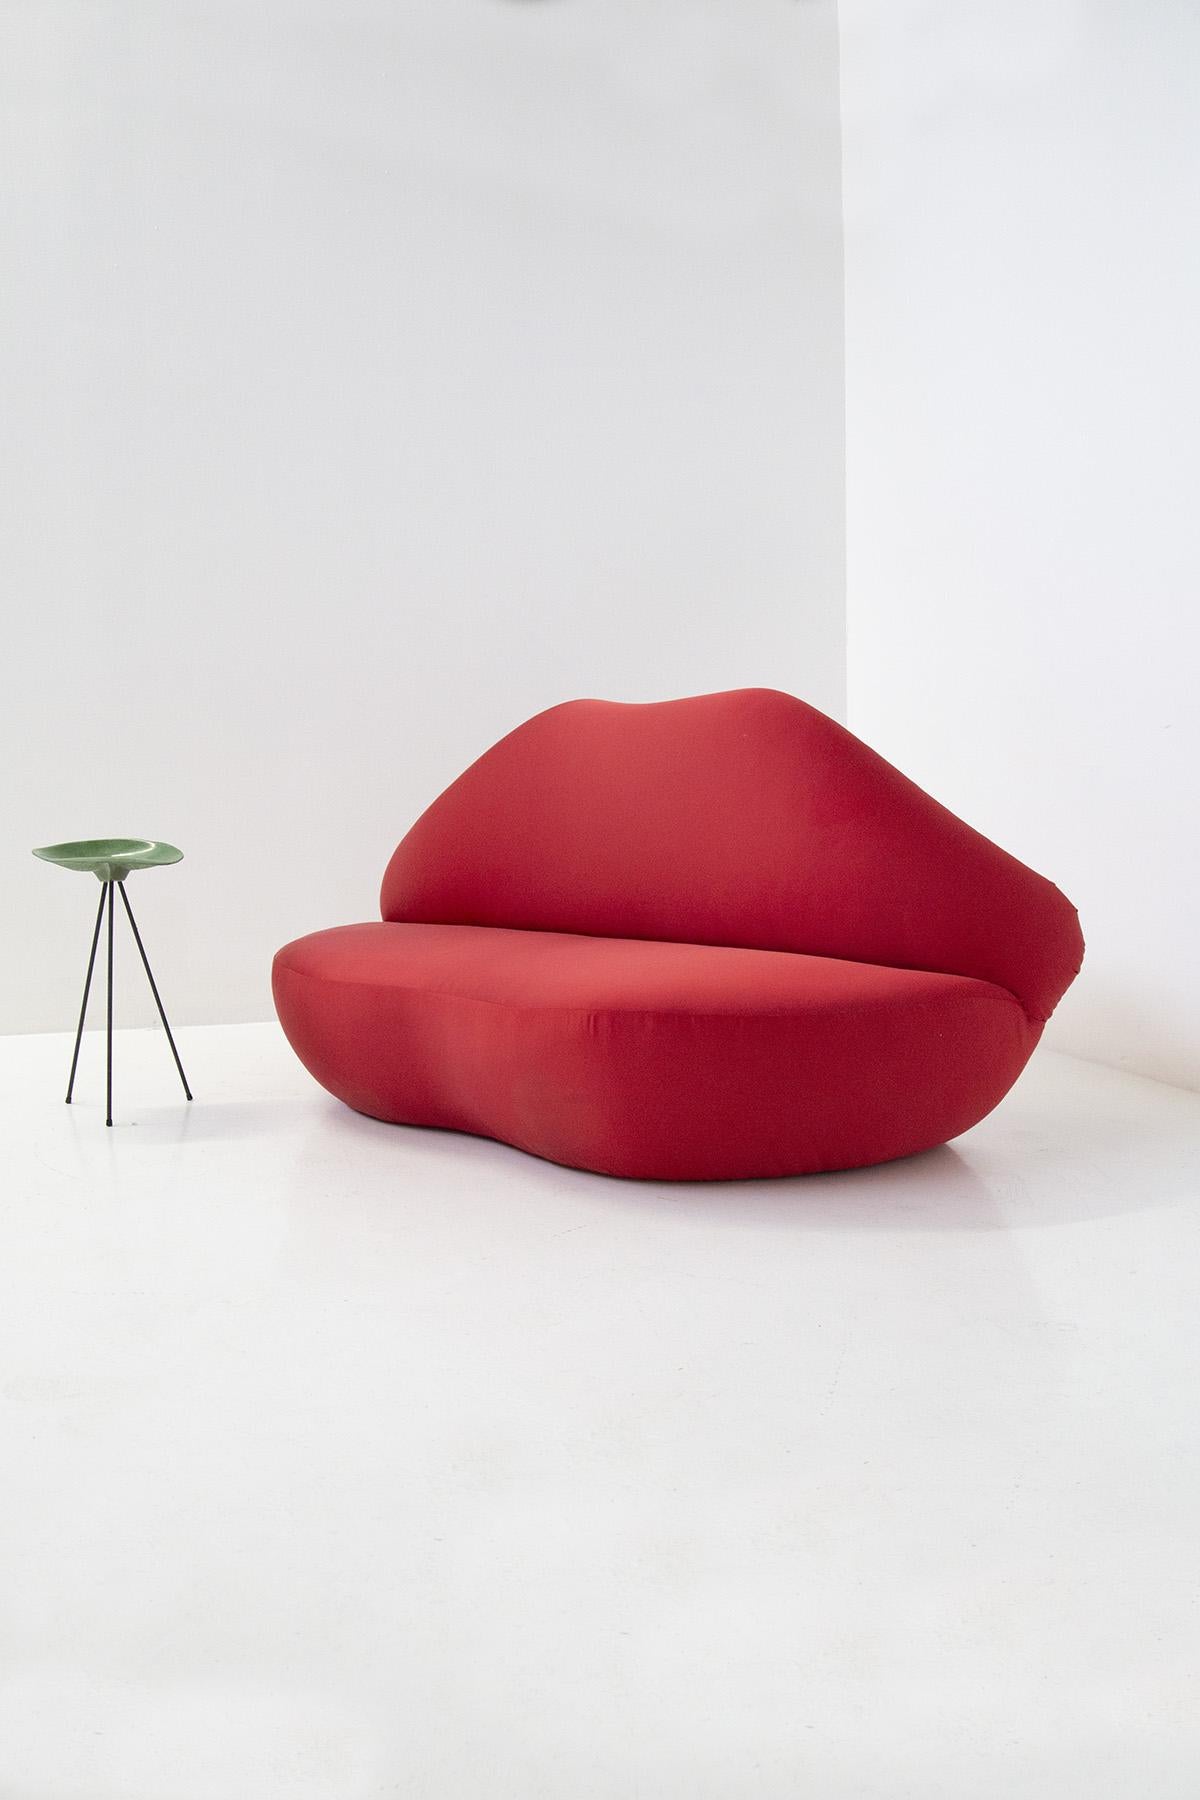 Iconic Italian sofa Model Bocca attributed to Studio 65 for the EDRA manufacture of the 1970s. The sofa is the Bocca model that became a POP icon of the famous Italian 1970s. Reupholstered in access red fabric to make every person's eyes catch. Some